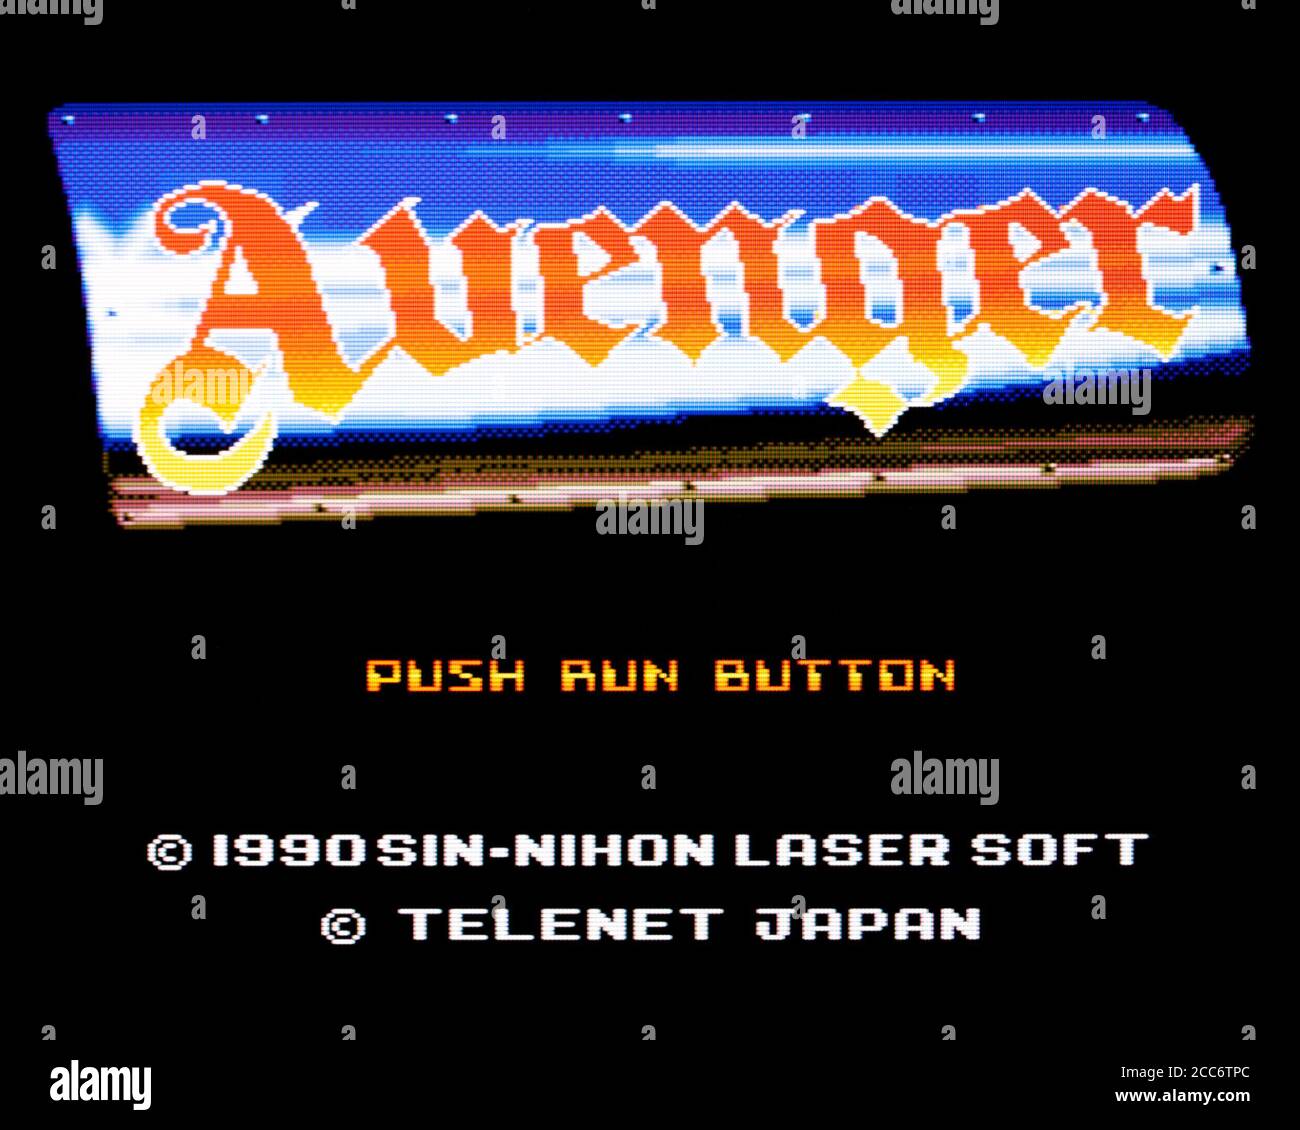 Avenger - PC Engine CD Videogame - Editorial use only Stock Photo